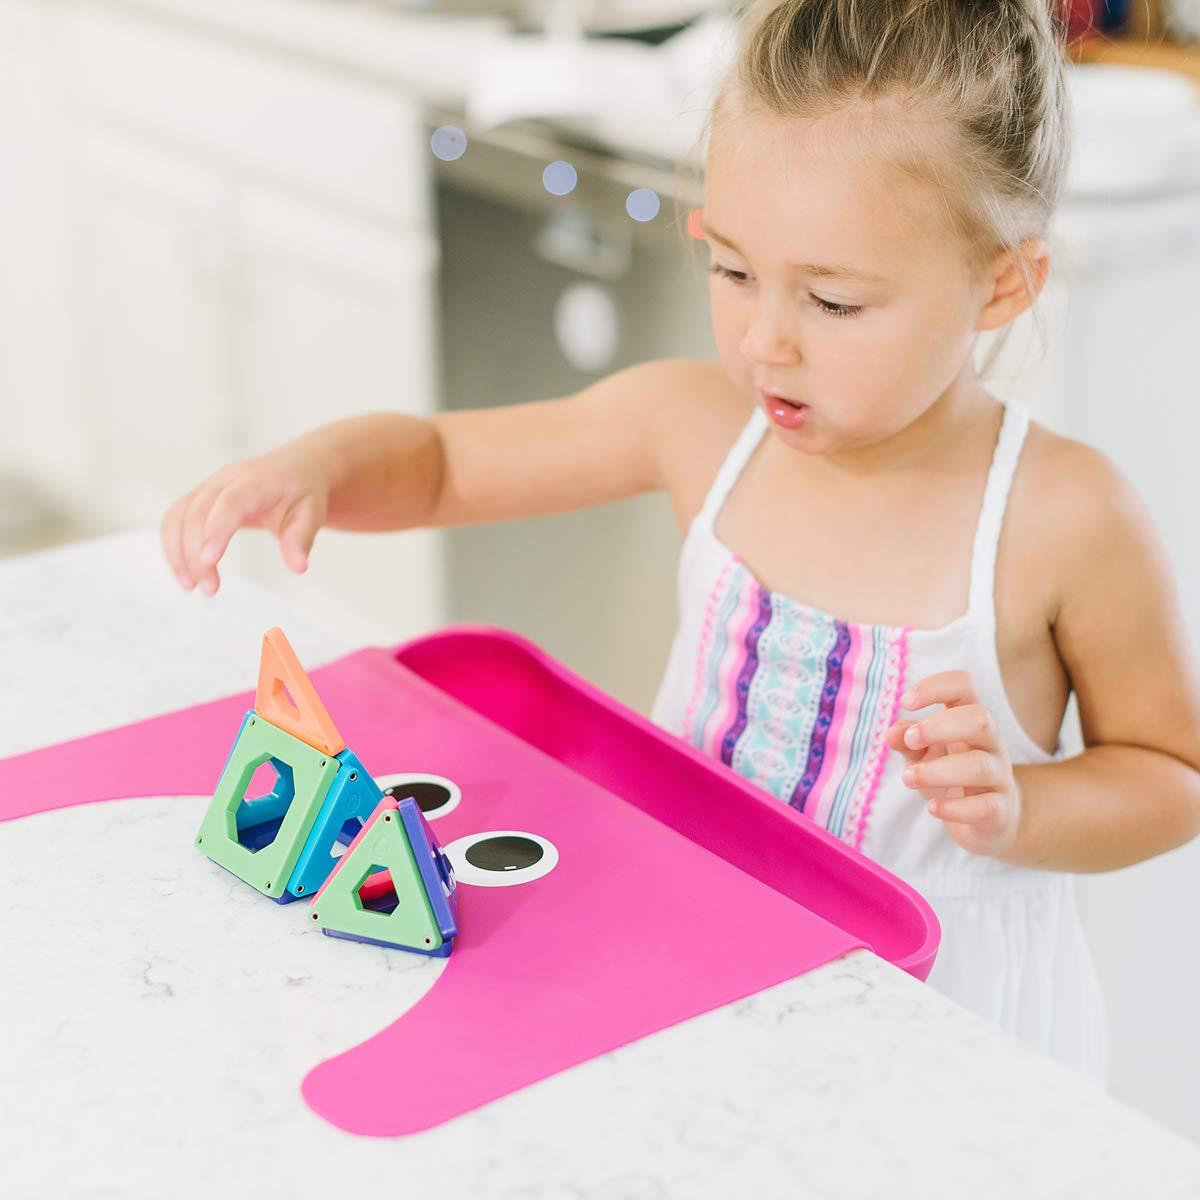 The Cibo Food Catching Baby Placemat with Suction - Wide Mouth Silicone  Placemat for Toddlers Kids and Babies - See Video Demonstration Strawberry  Red